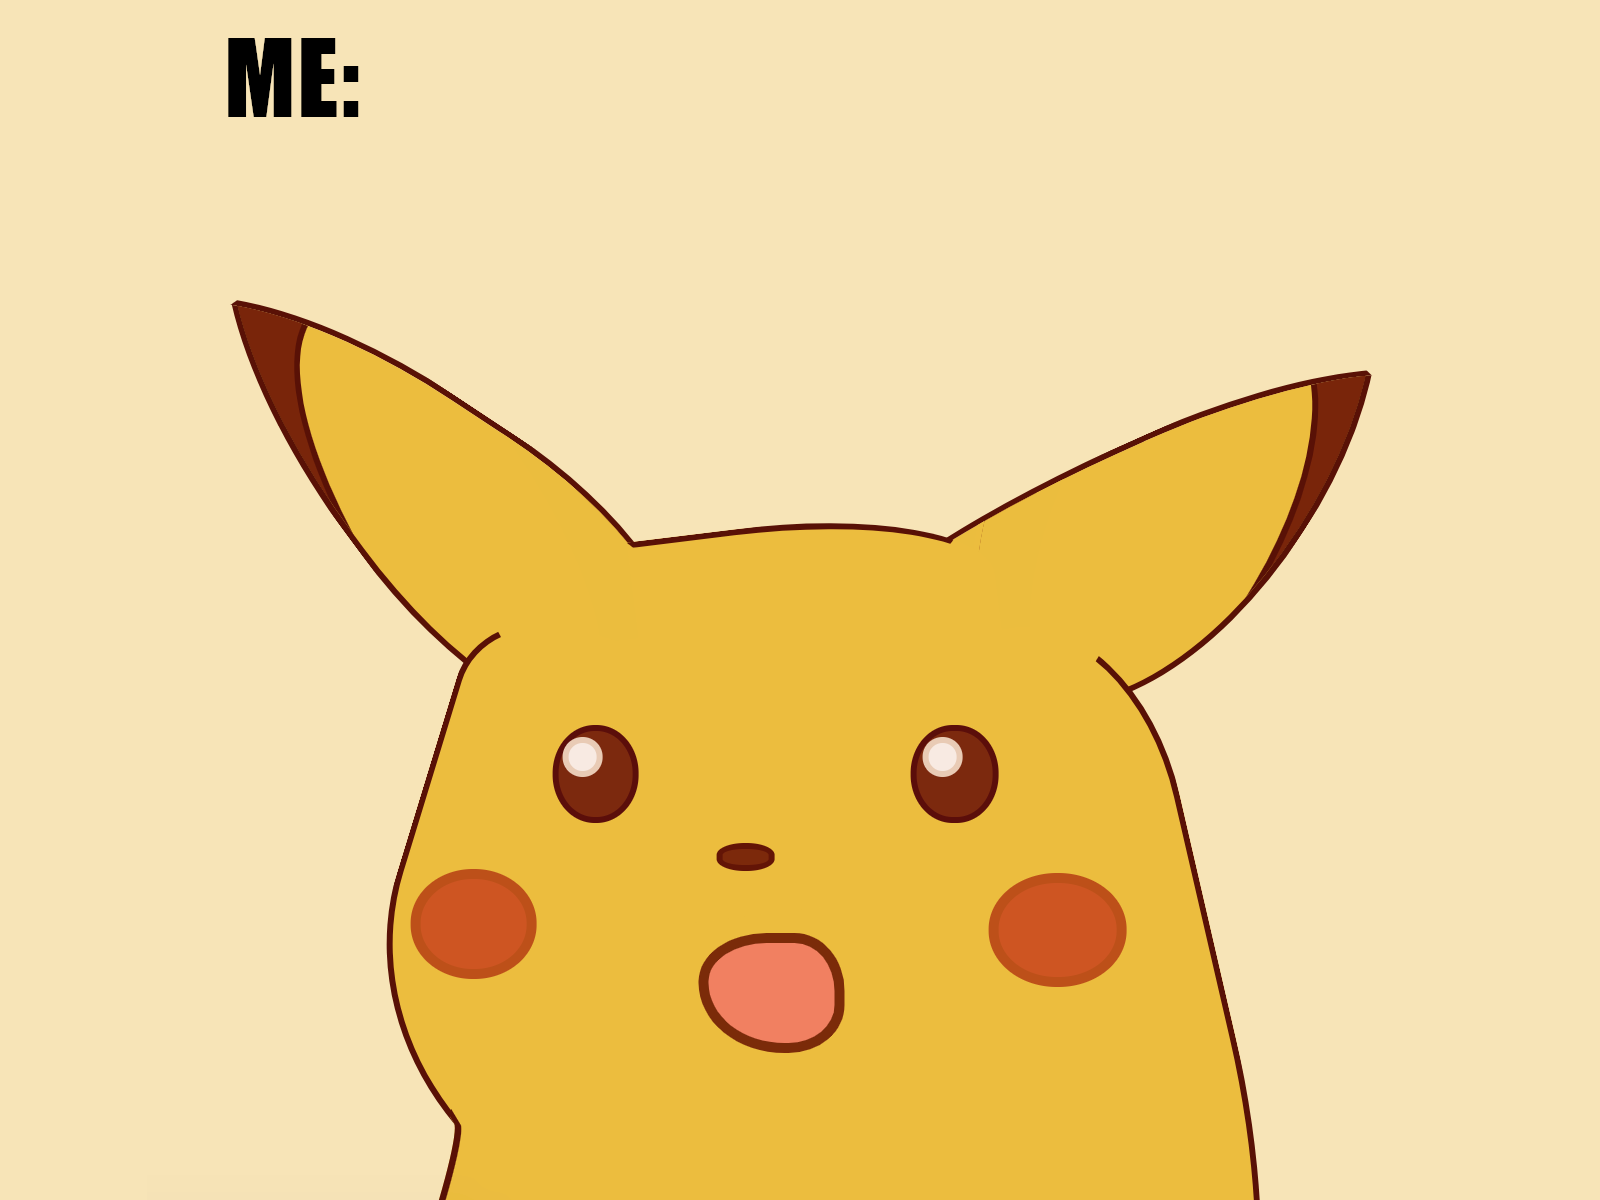 Cartoon showing Pikachu, one of the main characters of the TV show Pokemon